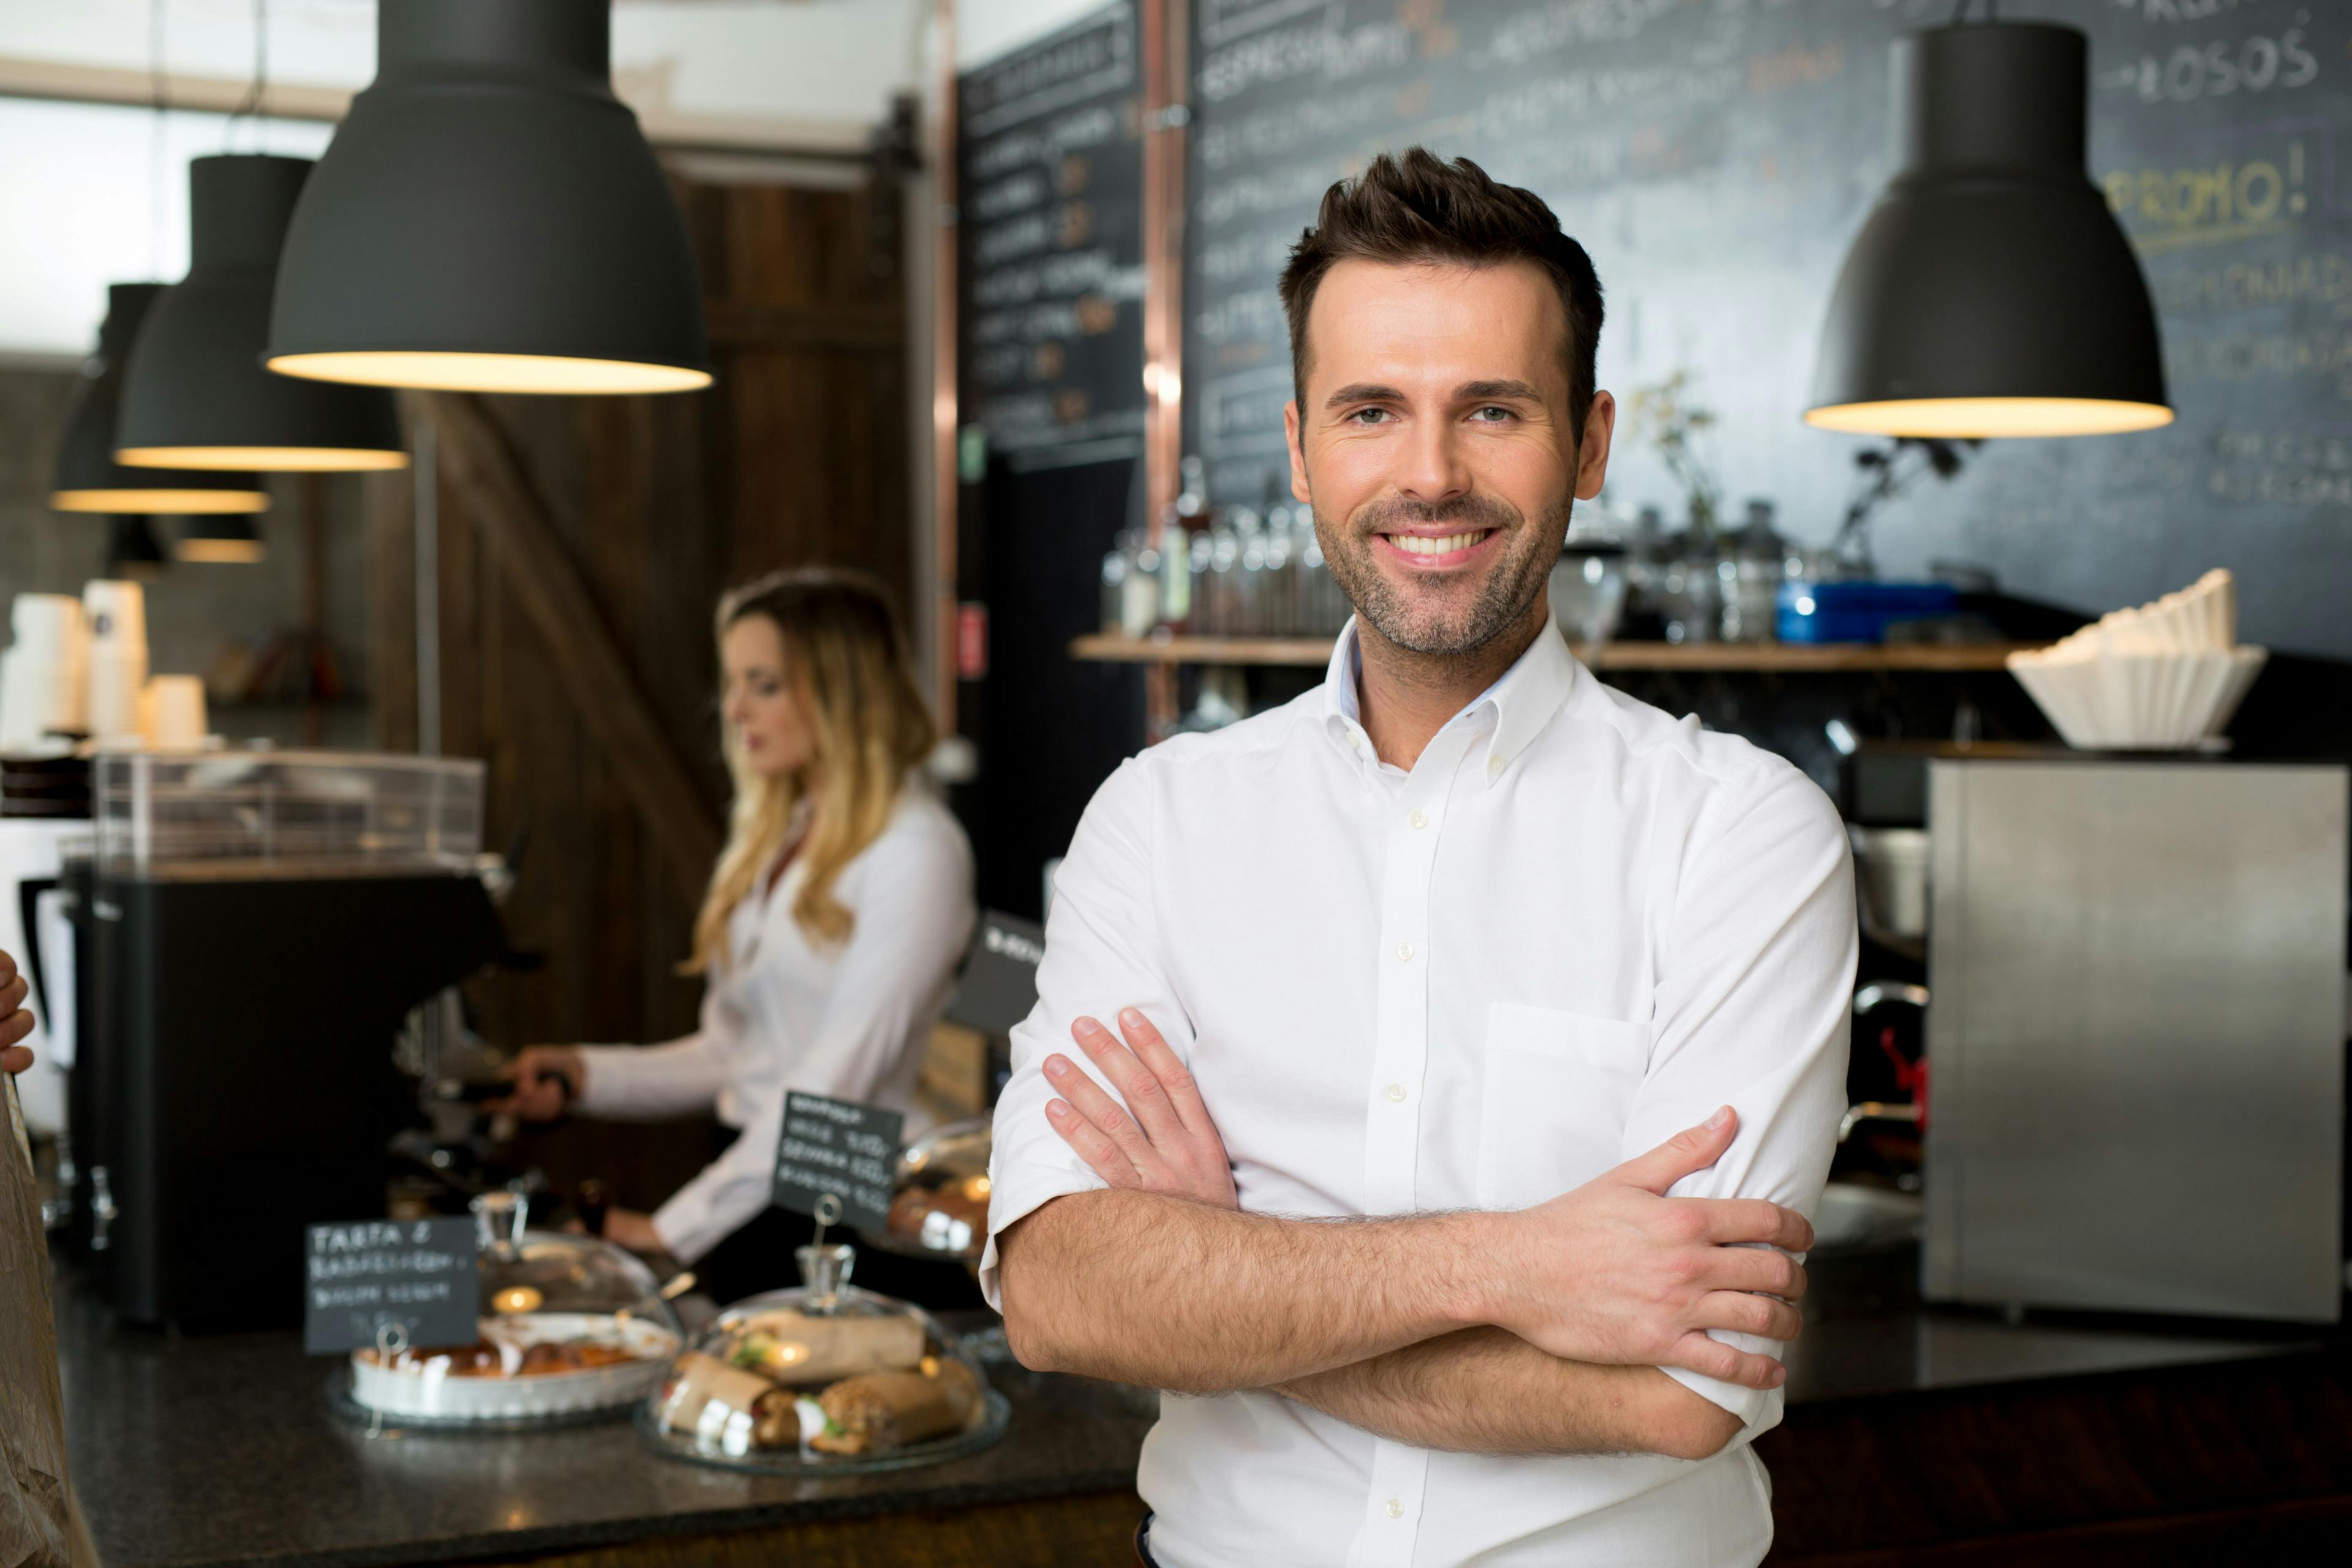 Restaurant manager standing with arms crossed in front of coffee shop.